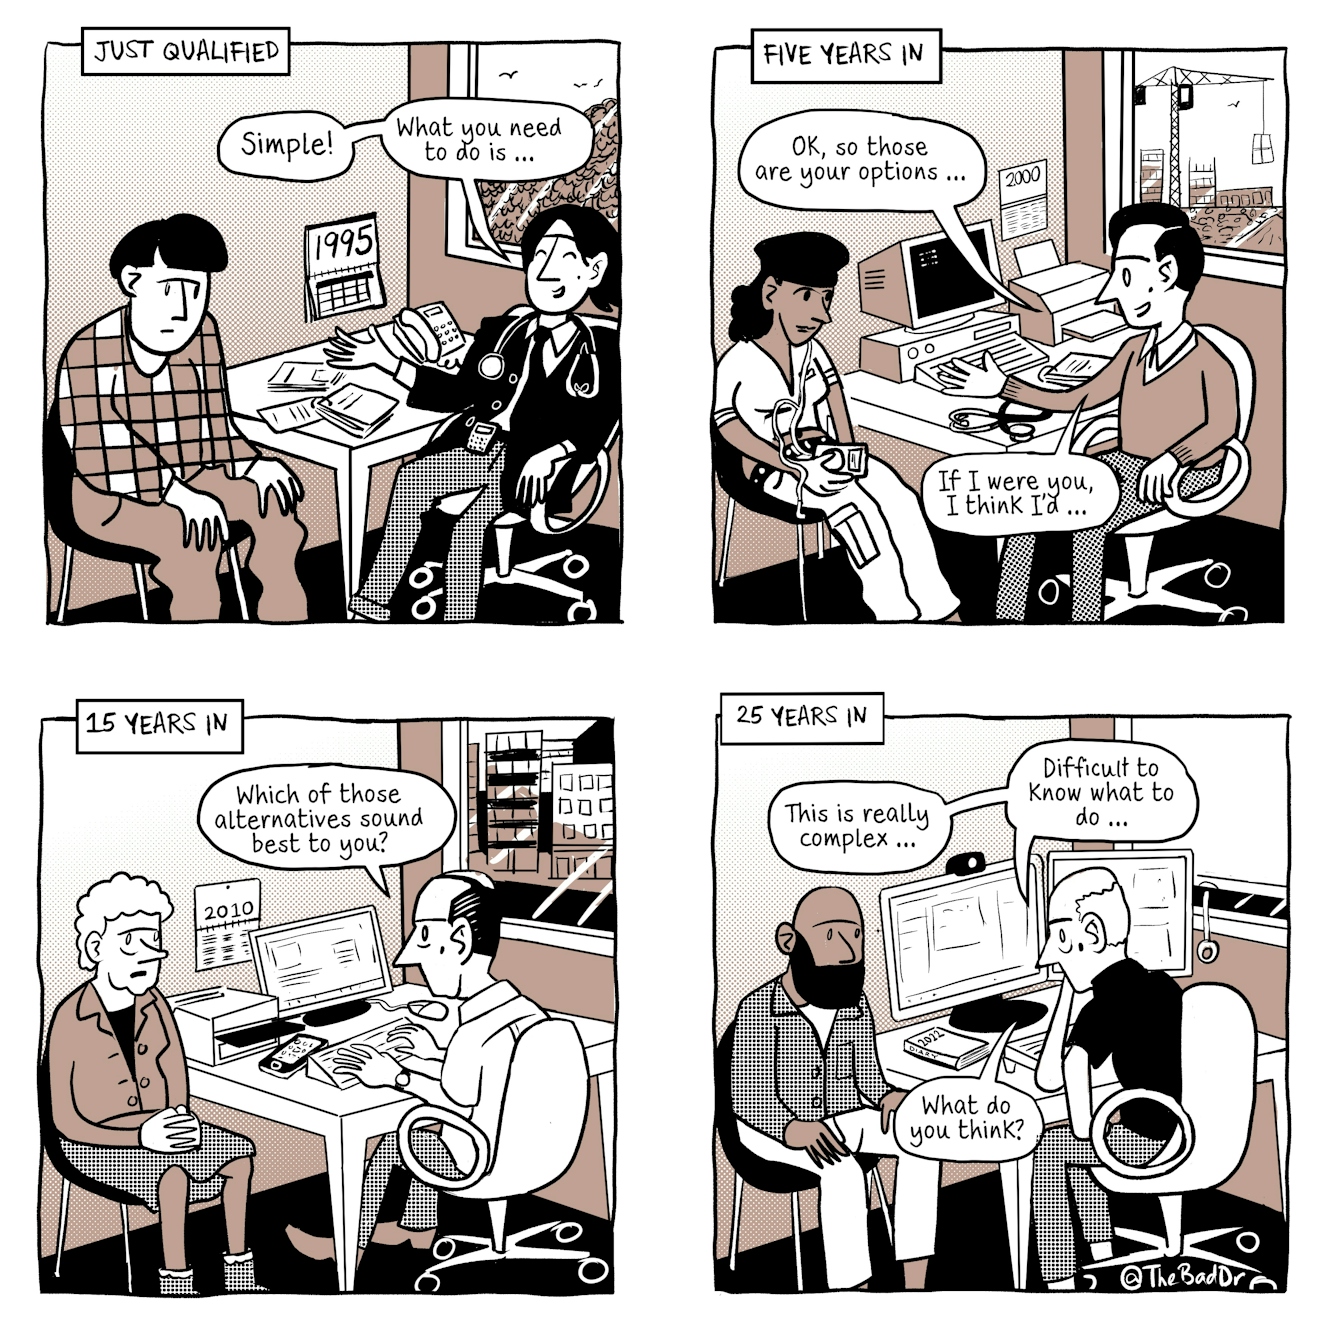 A four panel comic in black and white with a light brown accent tone. 

The first panel is titled 'just qualified' and shows a young male GP reclining at his consultation desk, hand outstretched to a forlorn looking patient. The GP is saying, 'Simple! What you need to do is...'. On his desk is a large desk phone and papers. The calendar on the wall shows the year 1995. The window behind the GP shows foliage and birds flying.

The second panel is titled 'five years in' and shows the same slightly older GP sitting upright at his consultation desk, hand outstretched to a hunched over patient. The GP is saying, 'OK, so these are your options...'. On his desk is a large desktop computer and printer. The calendar on the wall shows the year 2000. Out of the window behind the GP is a large crane and large high rise buildings being constructed. 

The third panel is titled '15 years in' and shows the same  GP with less hair sitting at his consultation desk, hands poised over his keyboard. The GP is saying to his elder patient, 'Which of those alternatives sound good to you?'. On his desk is a small computer screen and smartphone. The calendar on the wall shows the year 2010. Out of the window behind the GP the finished building development can be seen. 

The forth and final panel is titled '25 years in' and shows the same  GP with even less hair which is now white, hunched over his consultation desk, chin resting on his hand. The GP is saying to his patient, 'This is really complex... difficult to know what to do... What do you think?'. On his desk is are two large computer screens with a webcam. The paper diary on the desk shows the year 2022. The blind is pulled down on the window behind him and it looks like night time outside.